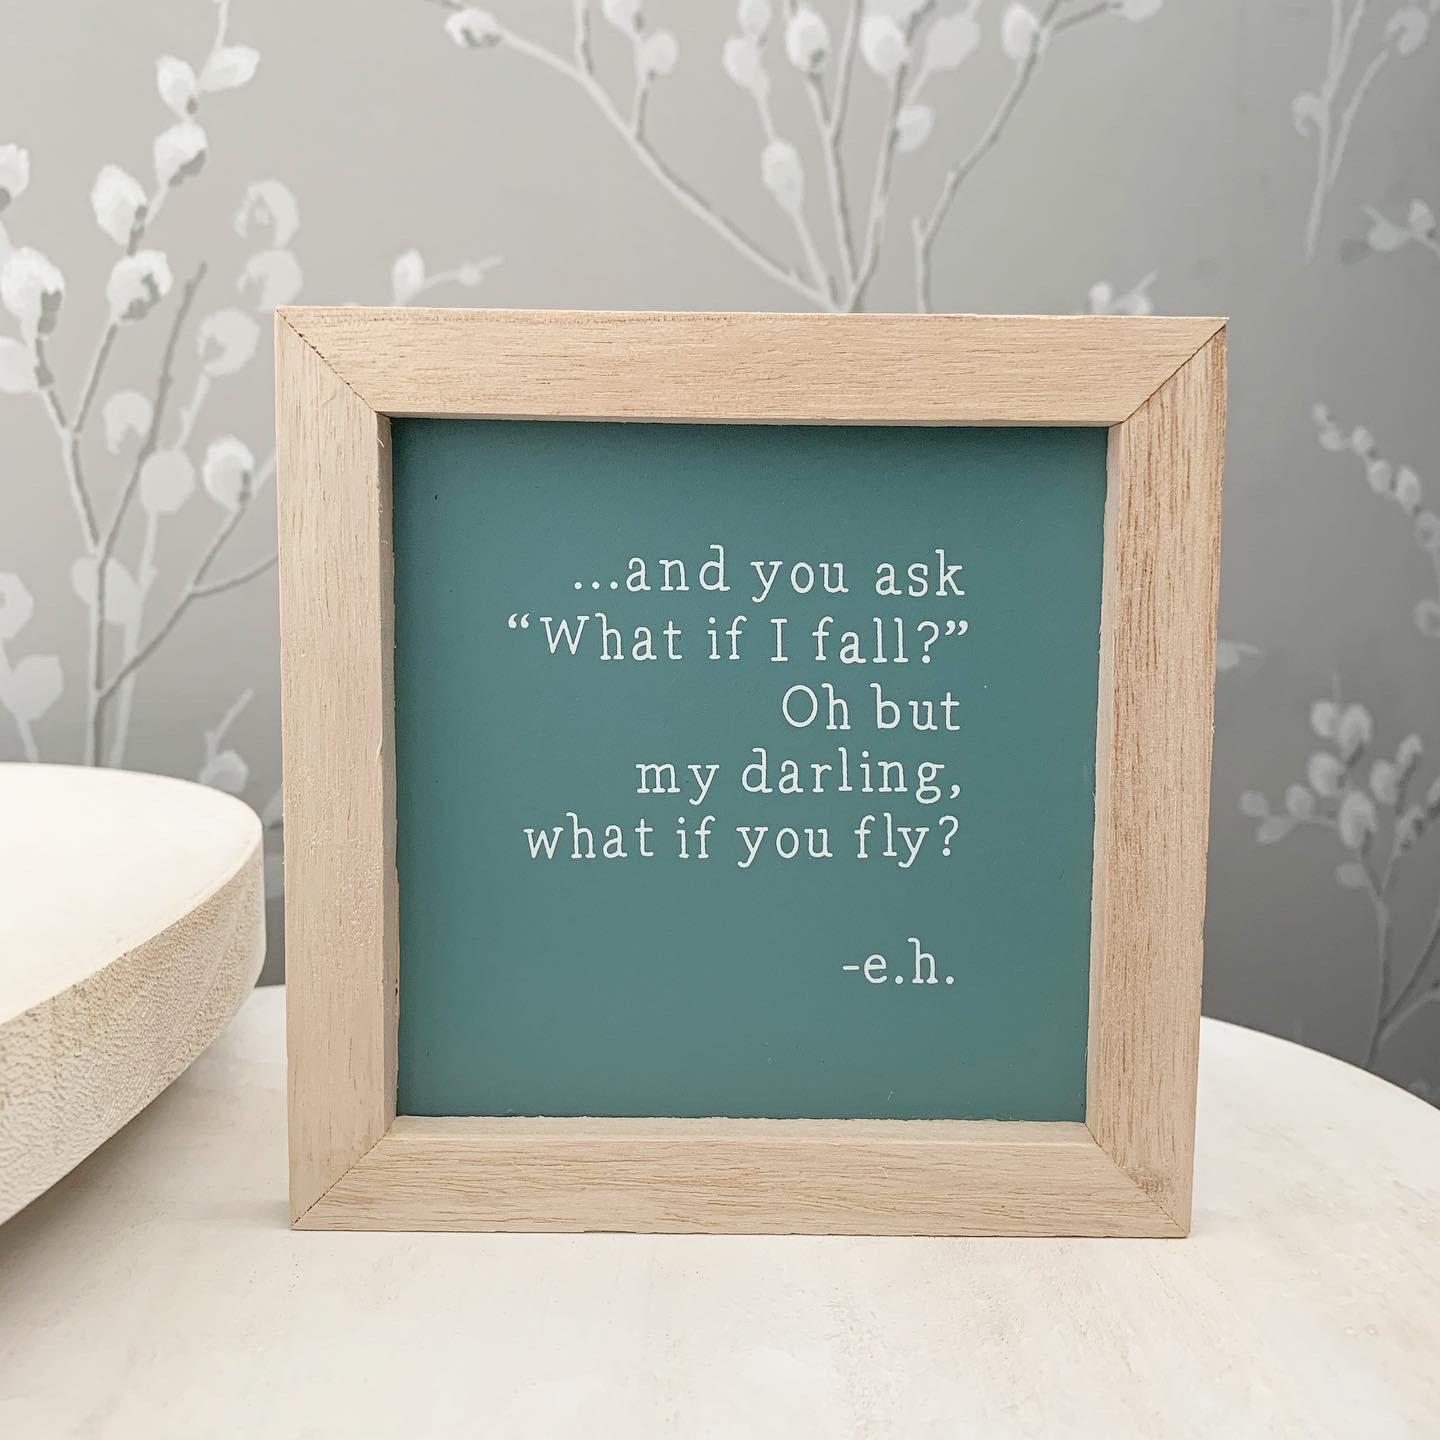 "What if you fly?" Framed Wooden Sign